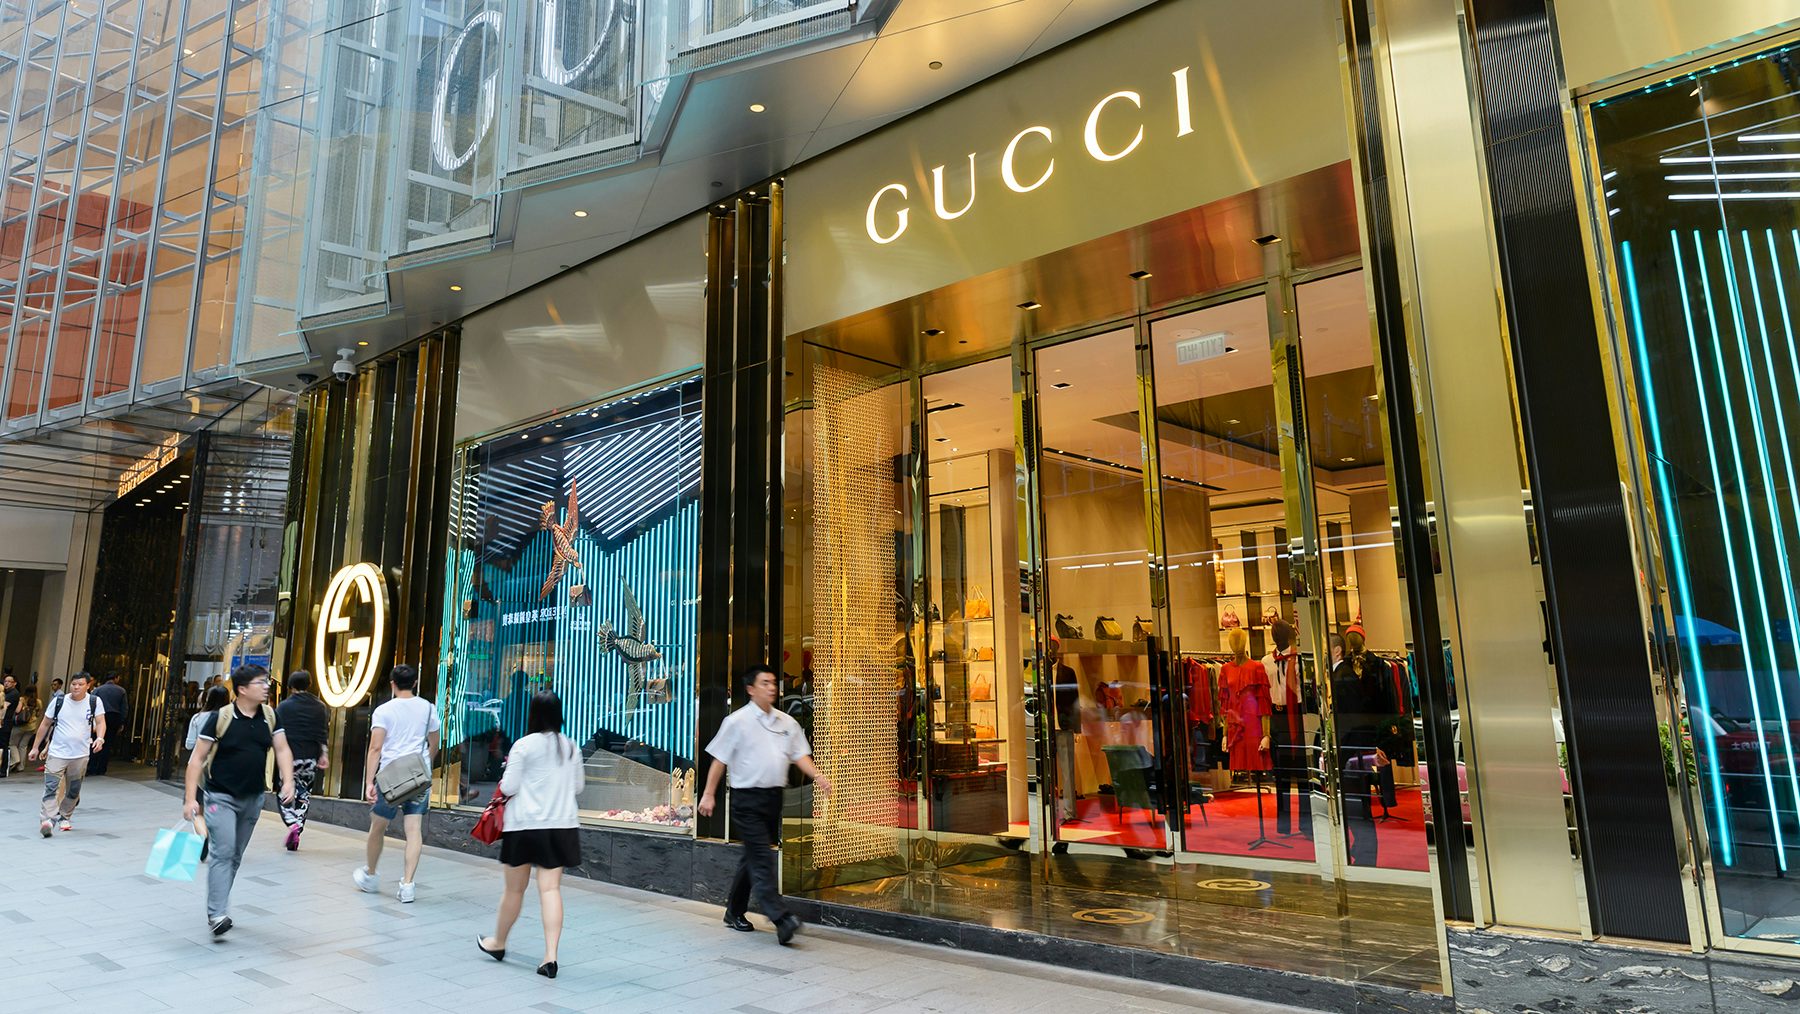 gucci in a louis store